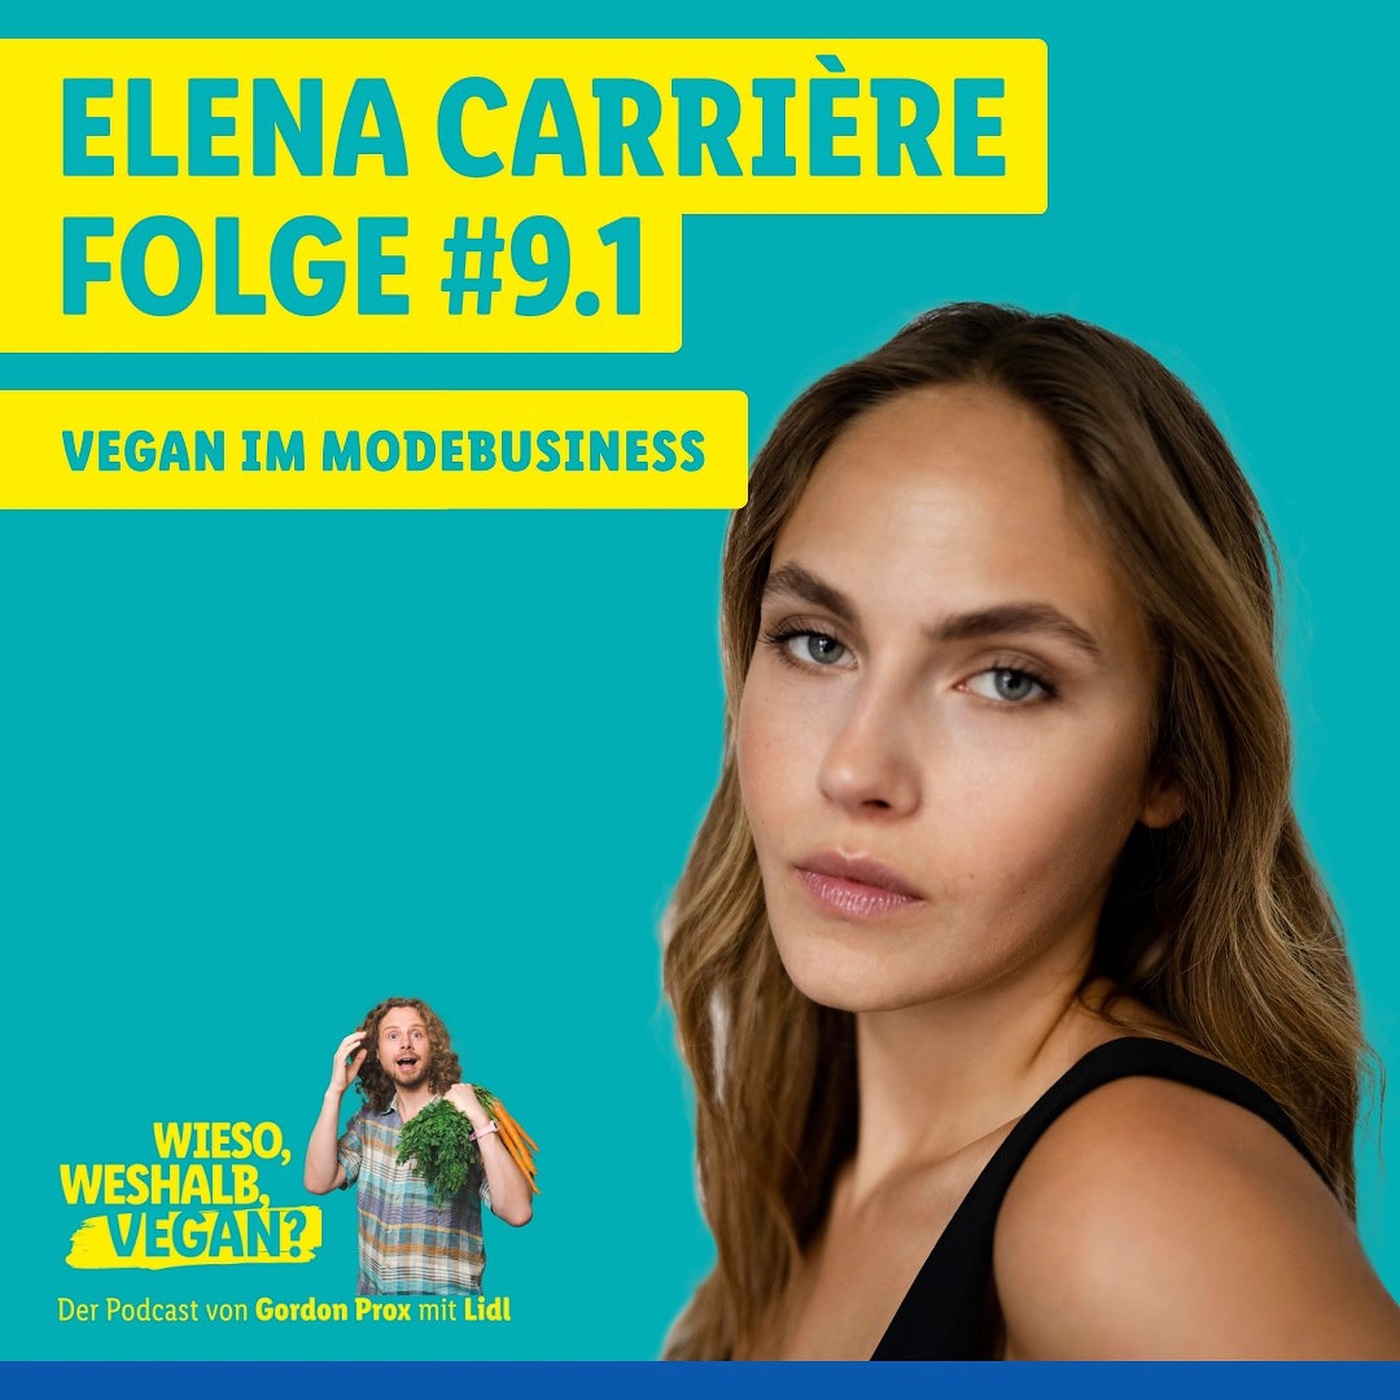 #9.1 Das ist mein absolutes Comfort Food – Elena Carrière​